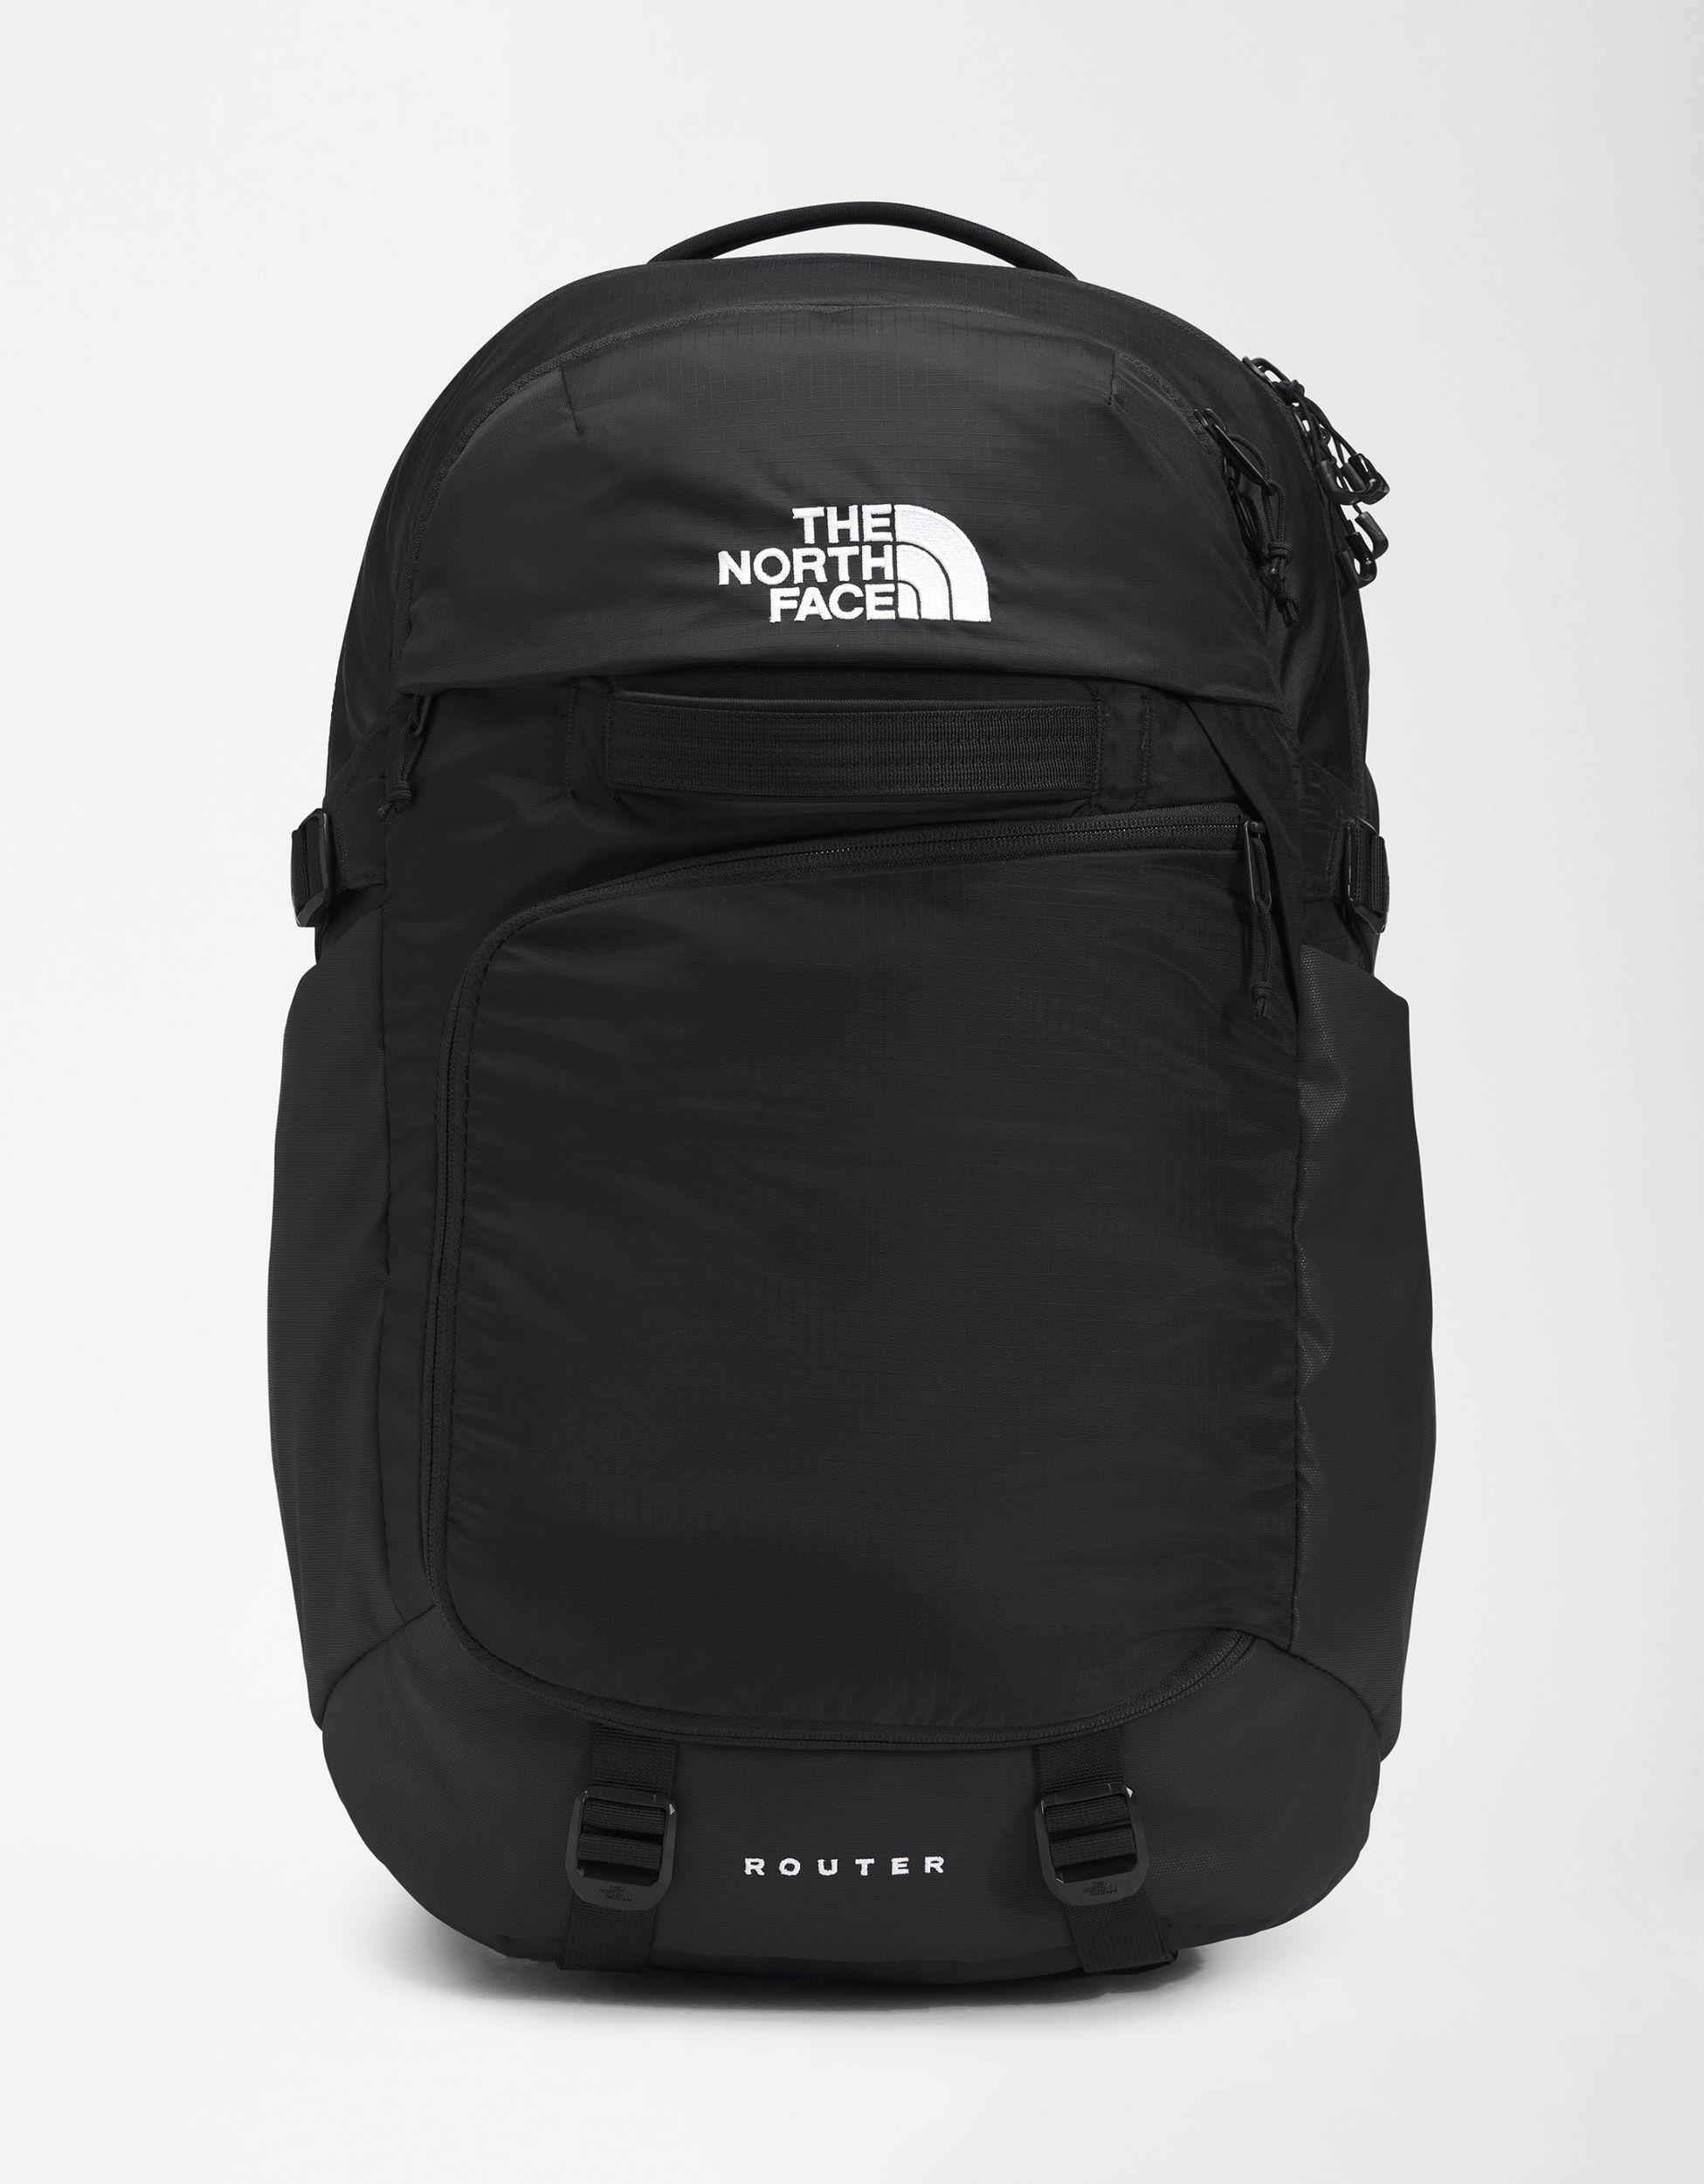 The North Face Router Large 40l Backpack in Black | Lyst